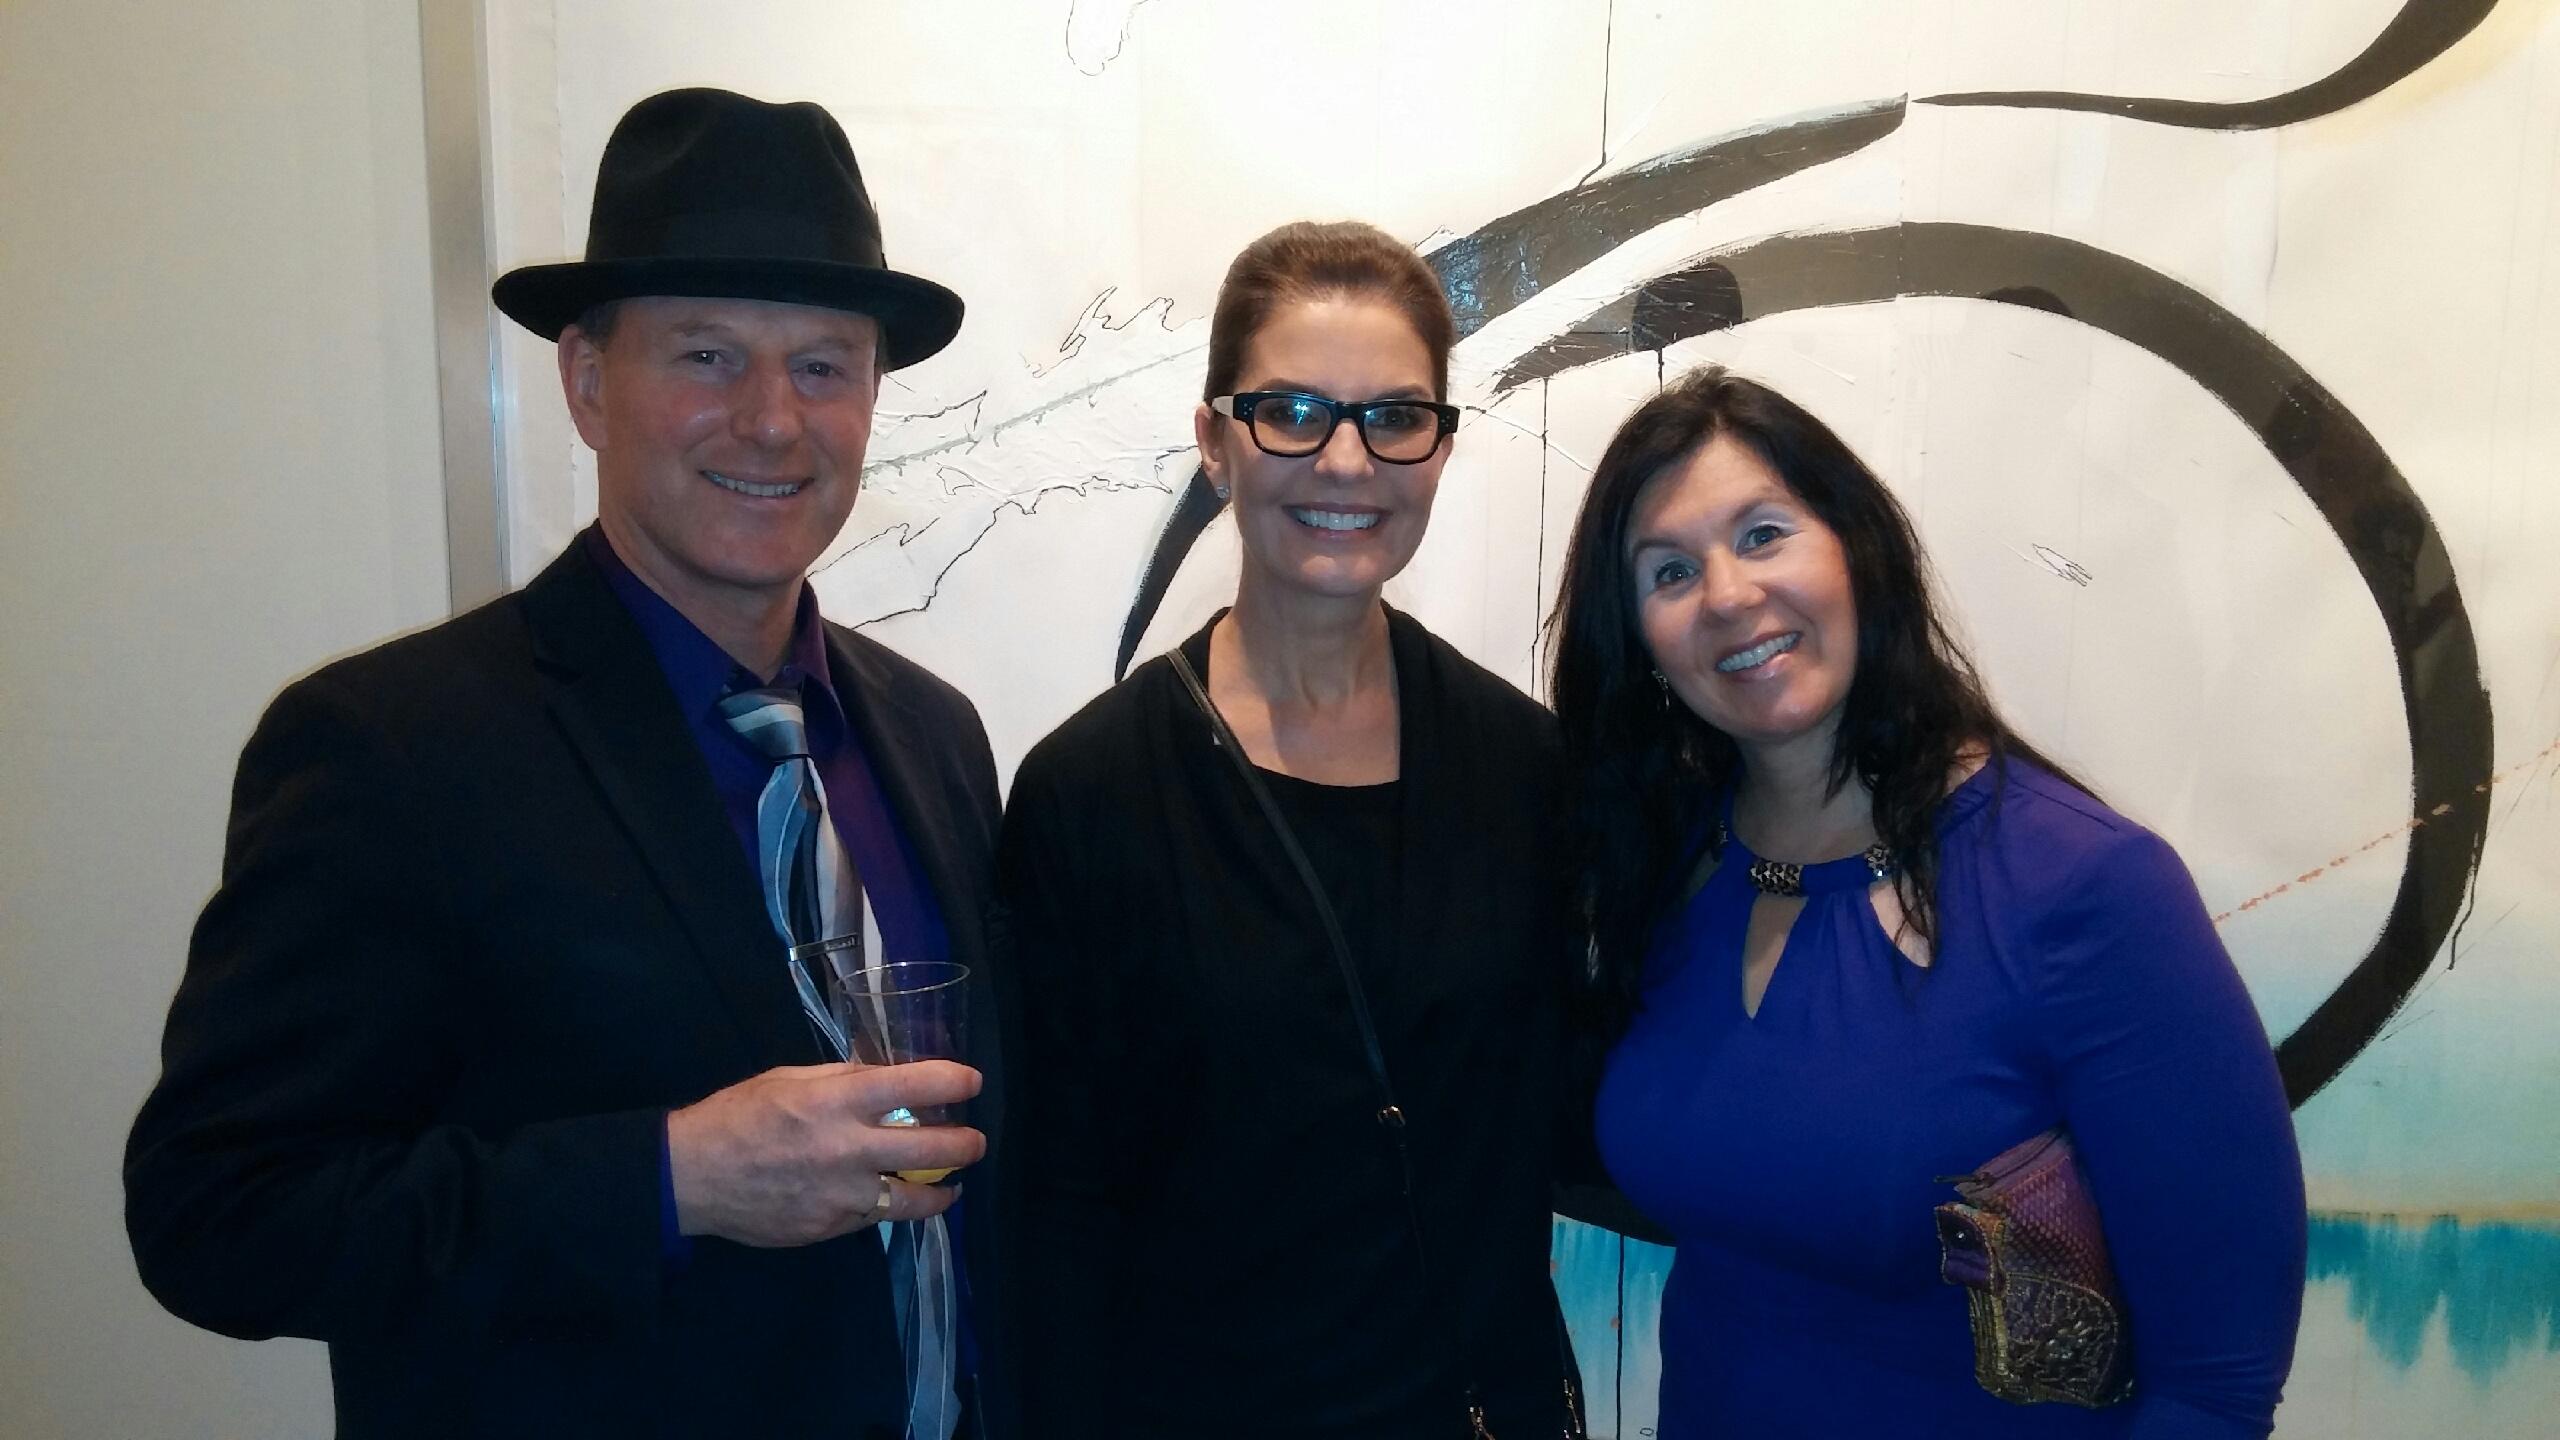 with Sela Ward and Serena Travis at her art gallery event in Hollywood - in front of Ms. Ward's piece titled 